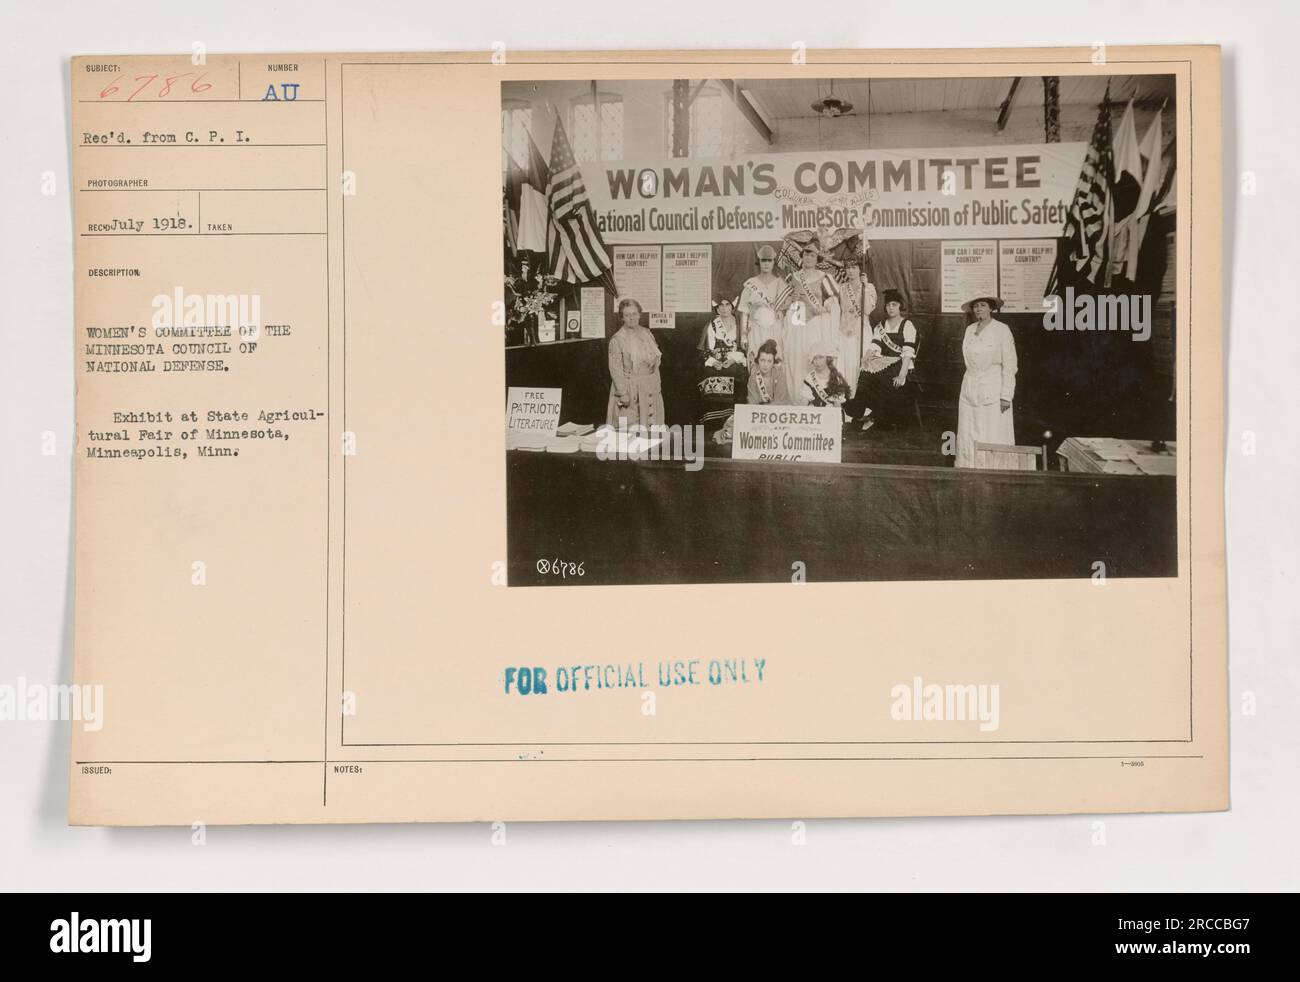 Women's Committee of the Minnesota Council of National Defense flags on display at the State Agricultural Fair in Minneapolis, July 1918. The flags were used to promote patriotic literature and support the National Council of Defense and Minnesota Commission of Public Safety. This image is part of the Photographs of American Military Activities during World War One collection. Stock Photo